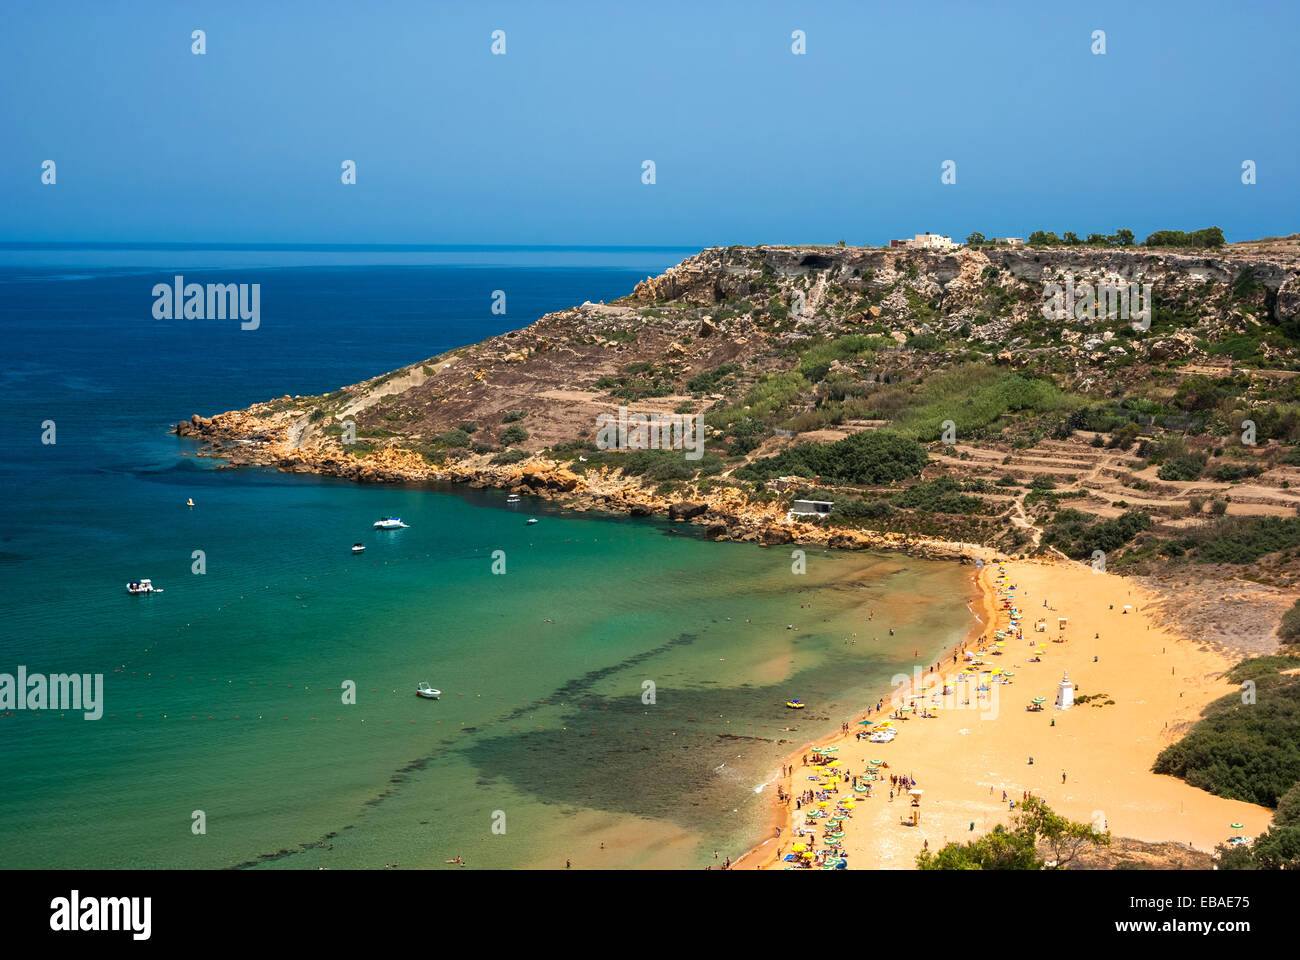 Stunning view over sandy beach at Ramla Bay in the northern part of the Gozo Island, one of the most popular beaches in Malta Stock Photo